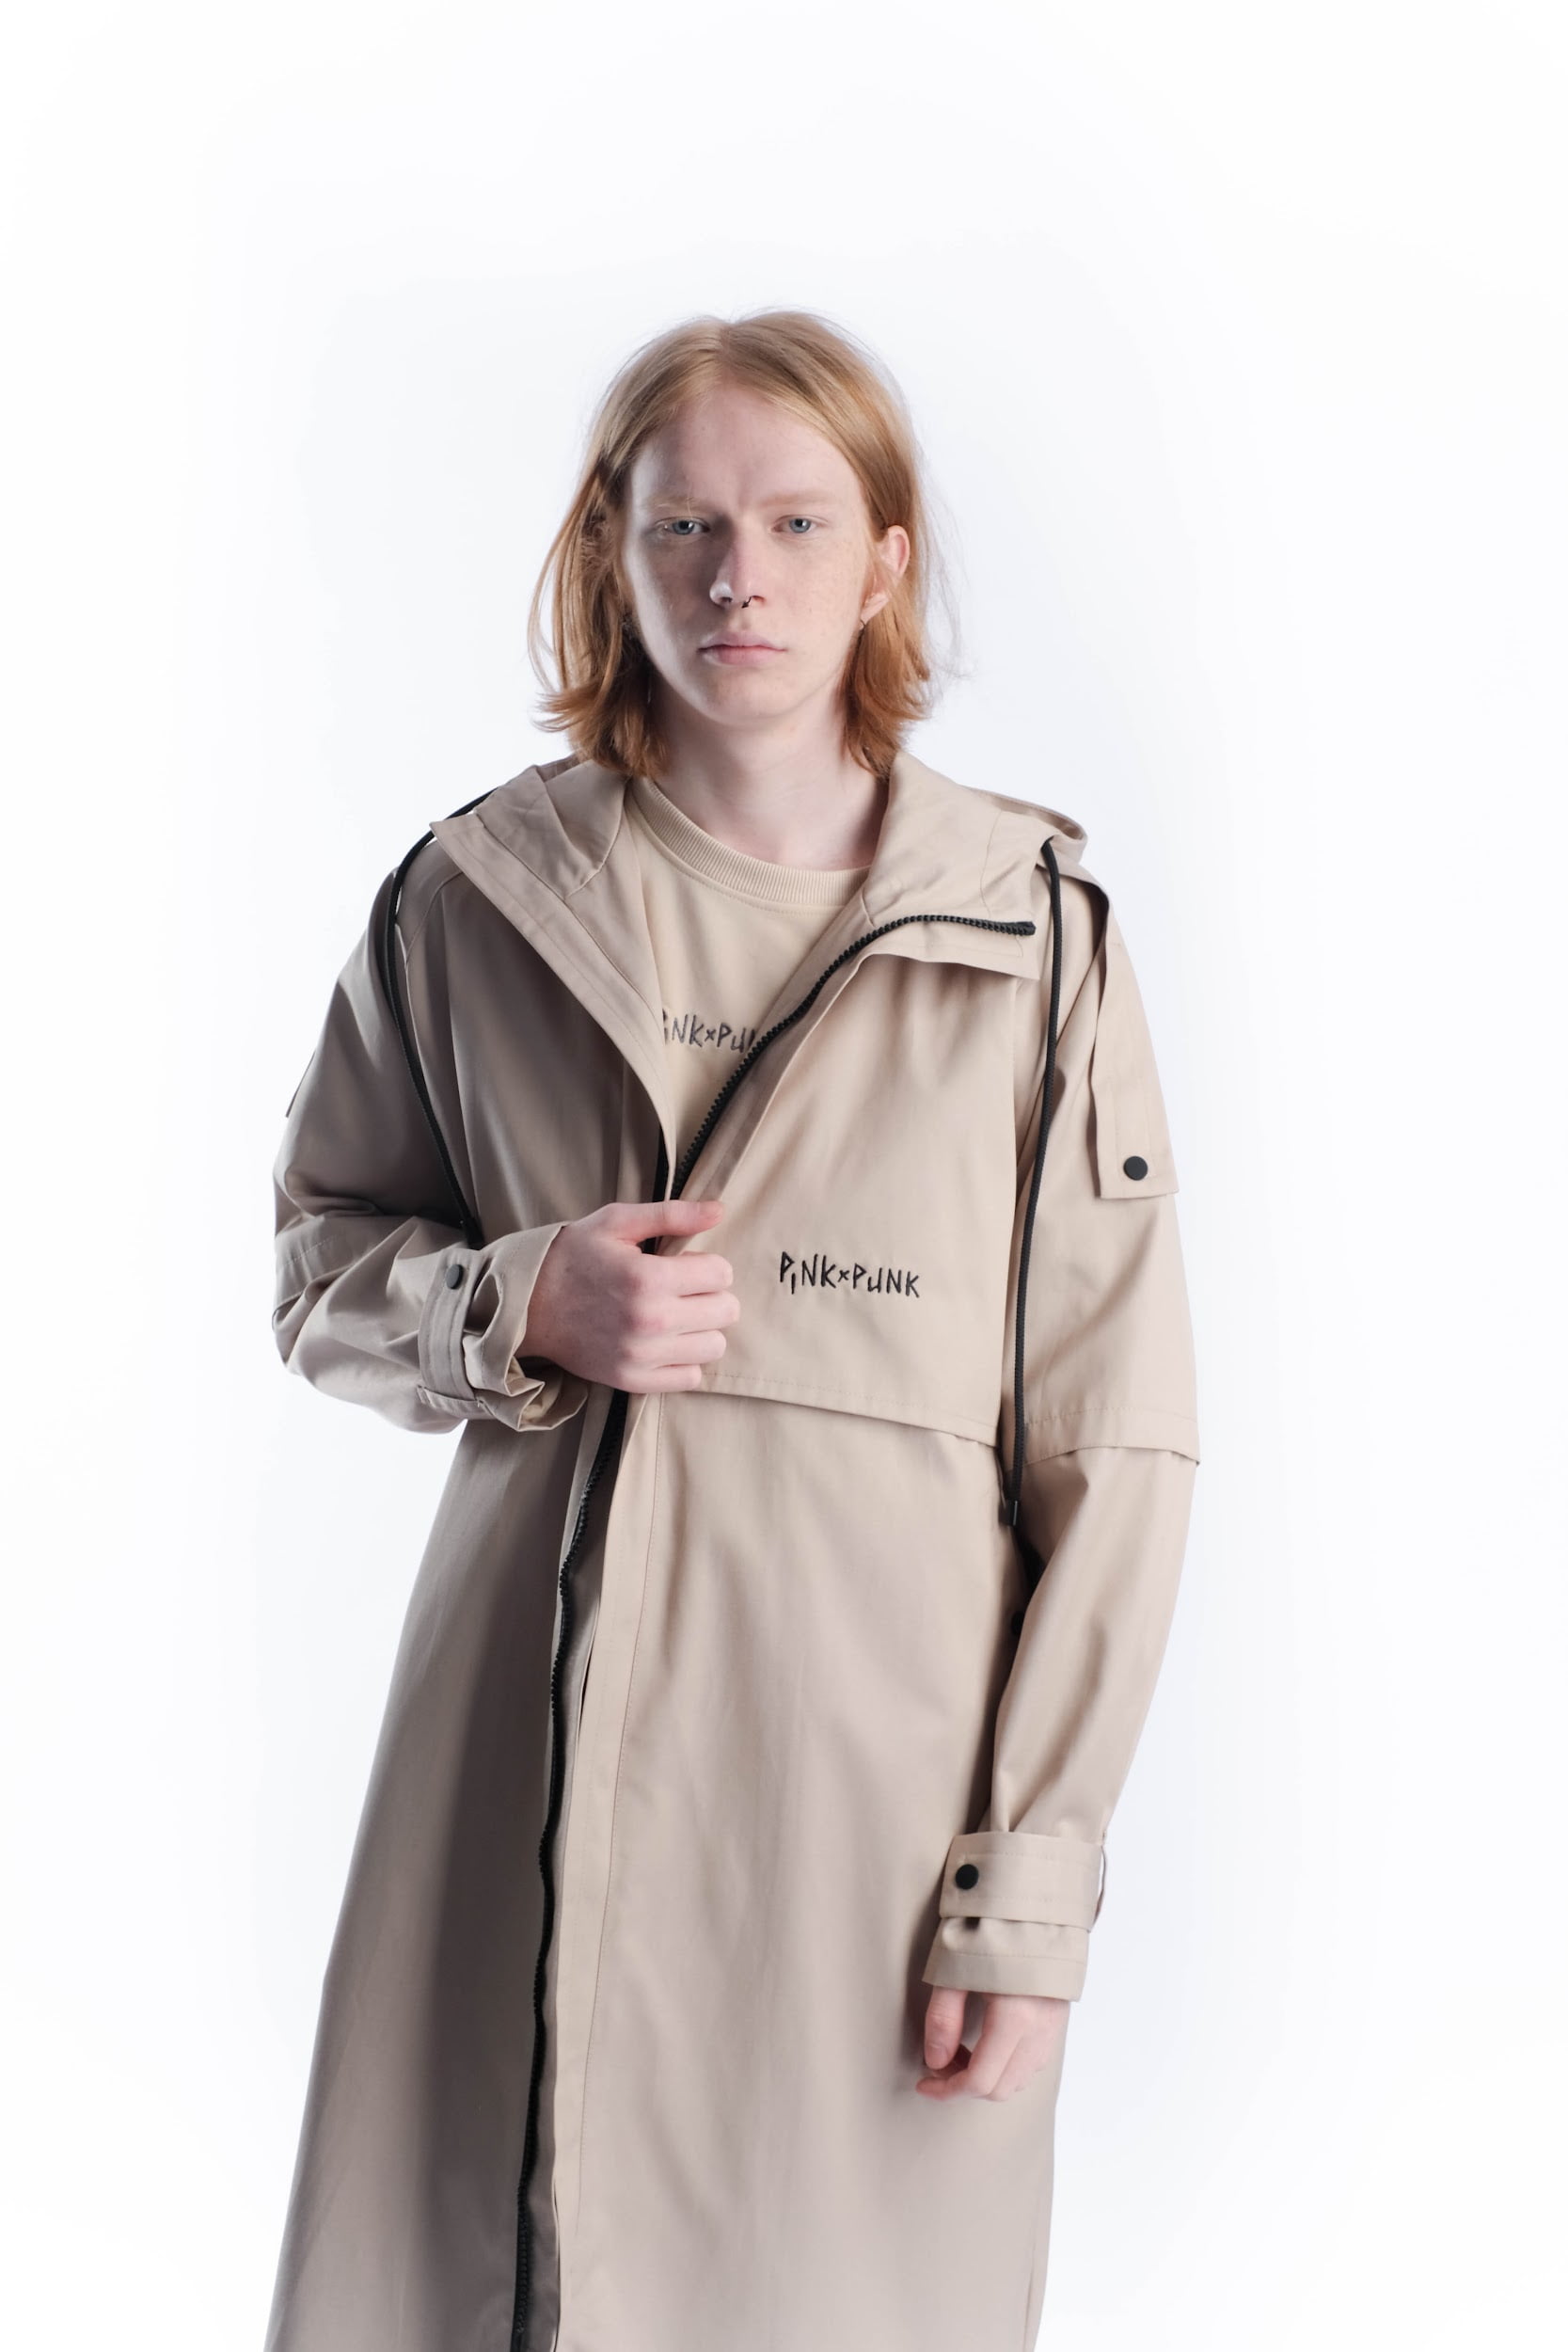 <p>PinkPunk designer trench coat. It is specially designed so that you don't look like everyone else in spring and autumn. It features a stylish asymmetrical yoke, high-quality hardware, adjustable sleeve width, and a hood.</p><p>Composition: 80% cotton 20% polyester</p><p>Lining composition: 45% cotton 55% polyester</p>